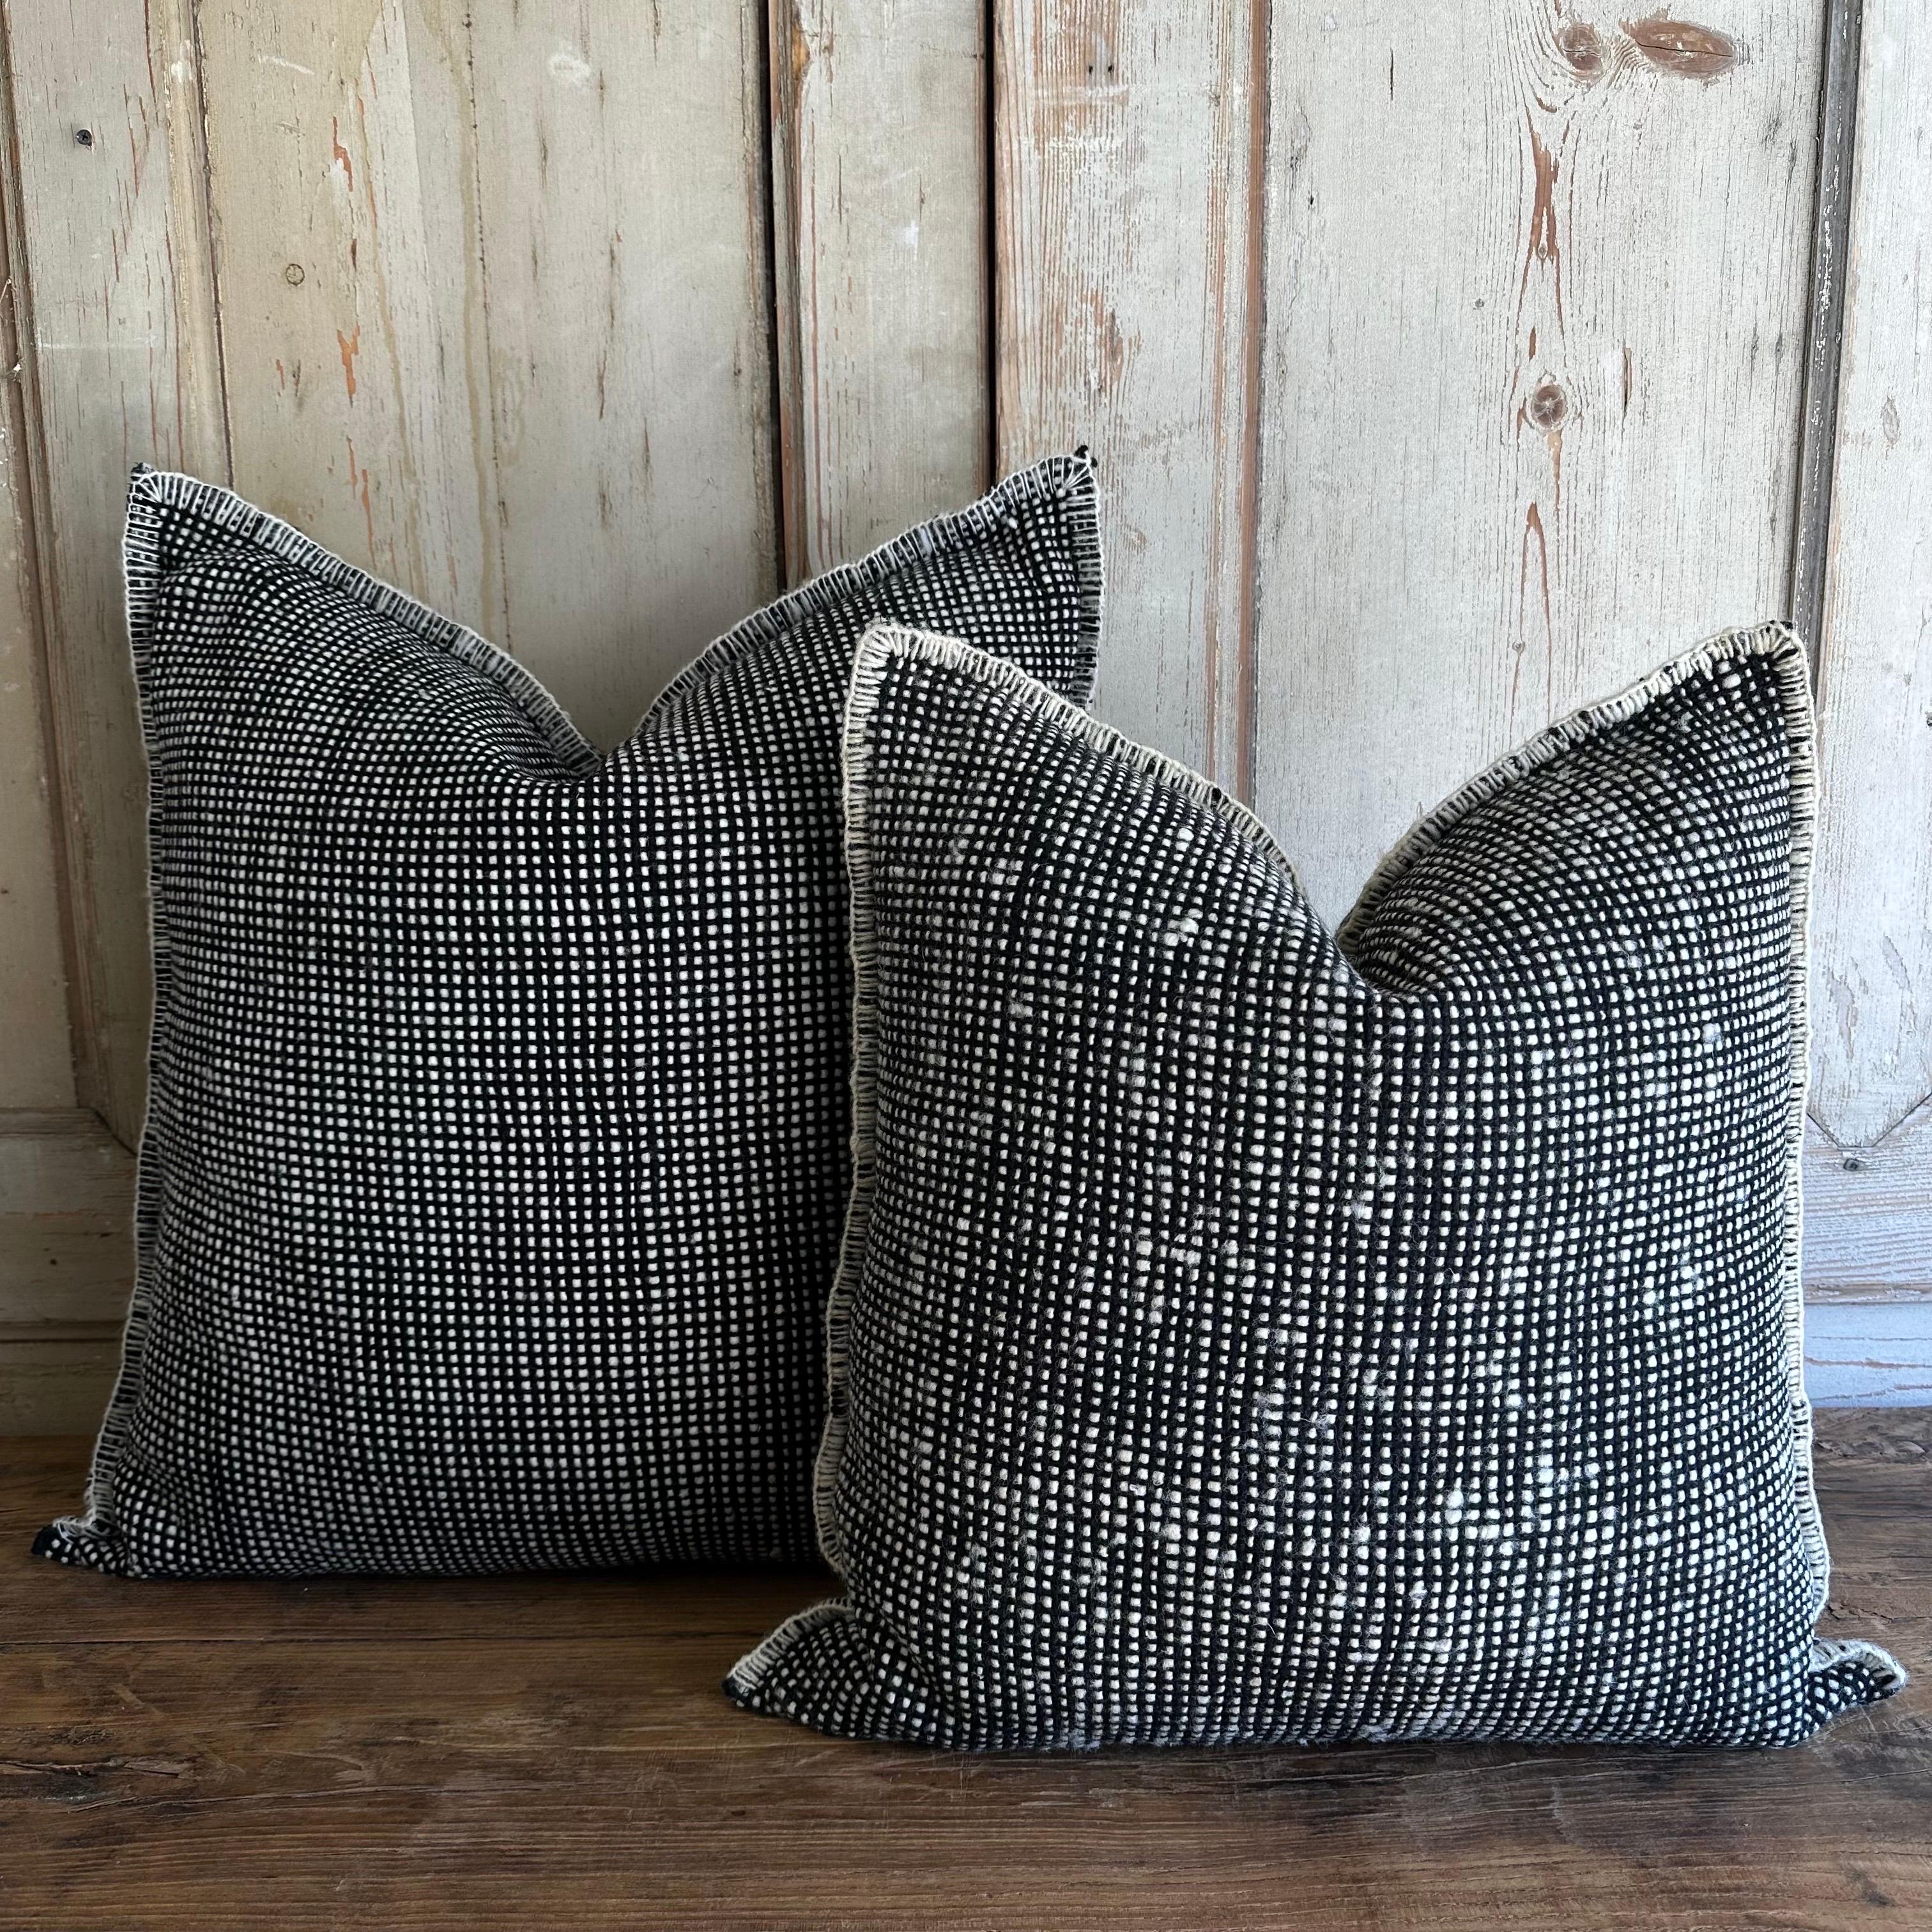 Billy handmade wool Alpaca pillow
All of our products are commissioned and handmade by the craftswomen of Chiloé. The textiles are made with 100% wool from ’Chilota’ sheep, that are born and raised on the island. The process by which these